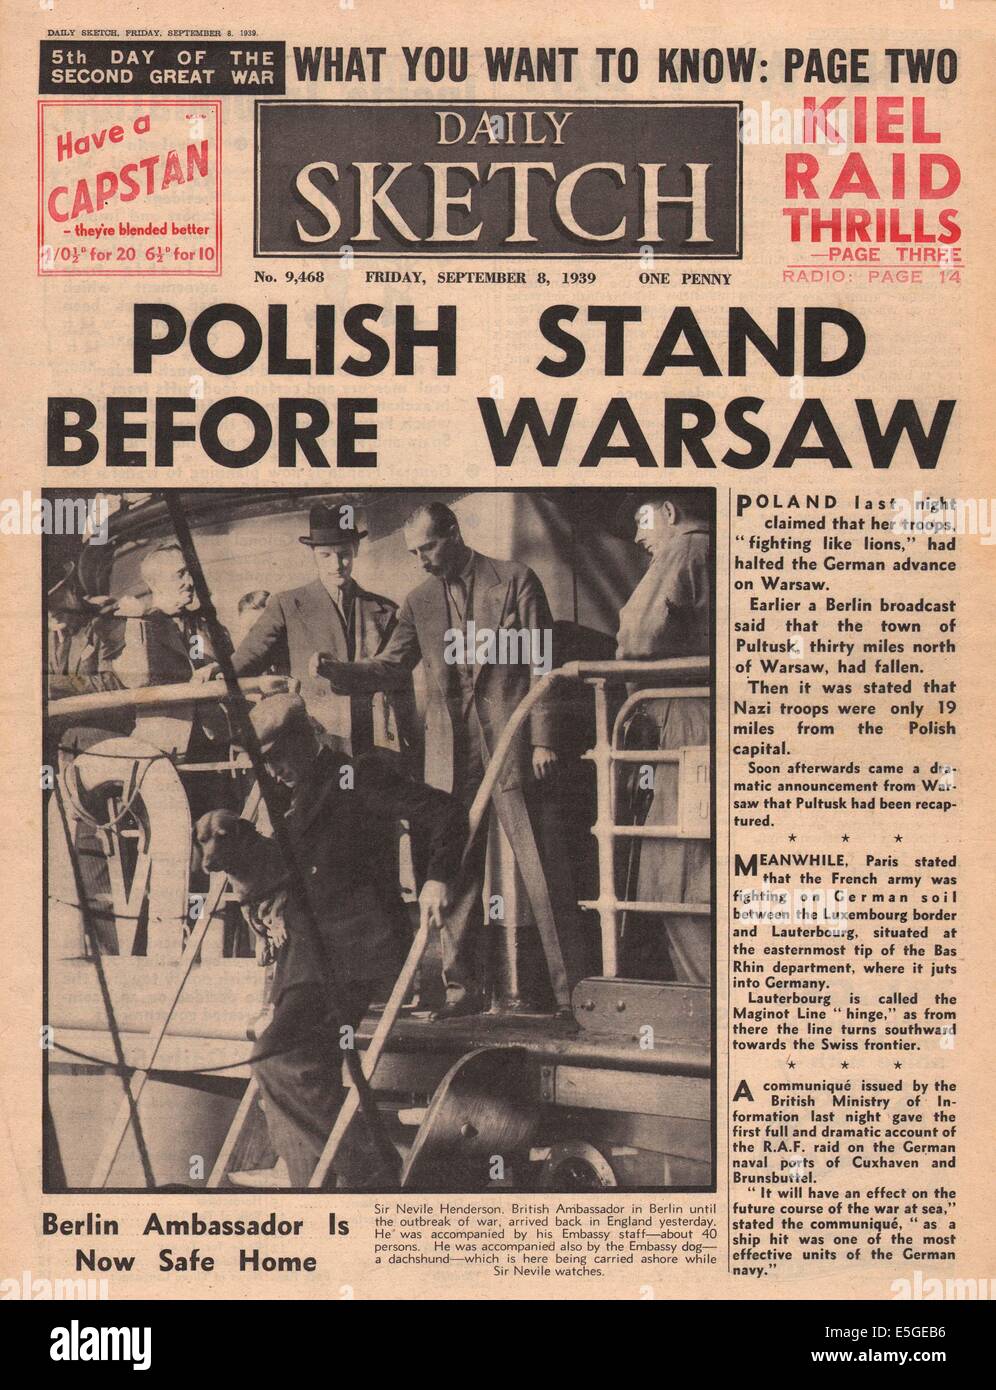 1939 Daily Sketch page reporting Polish troops stand before Warsaw Stock Photo